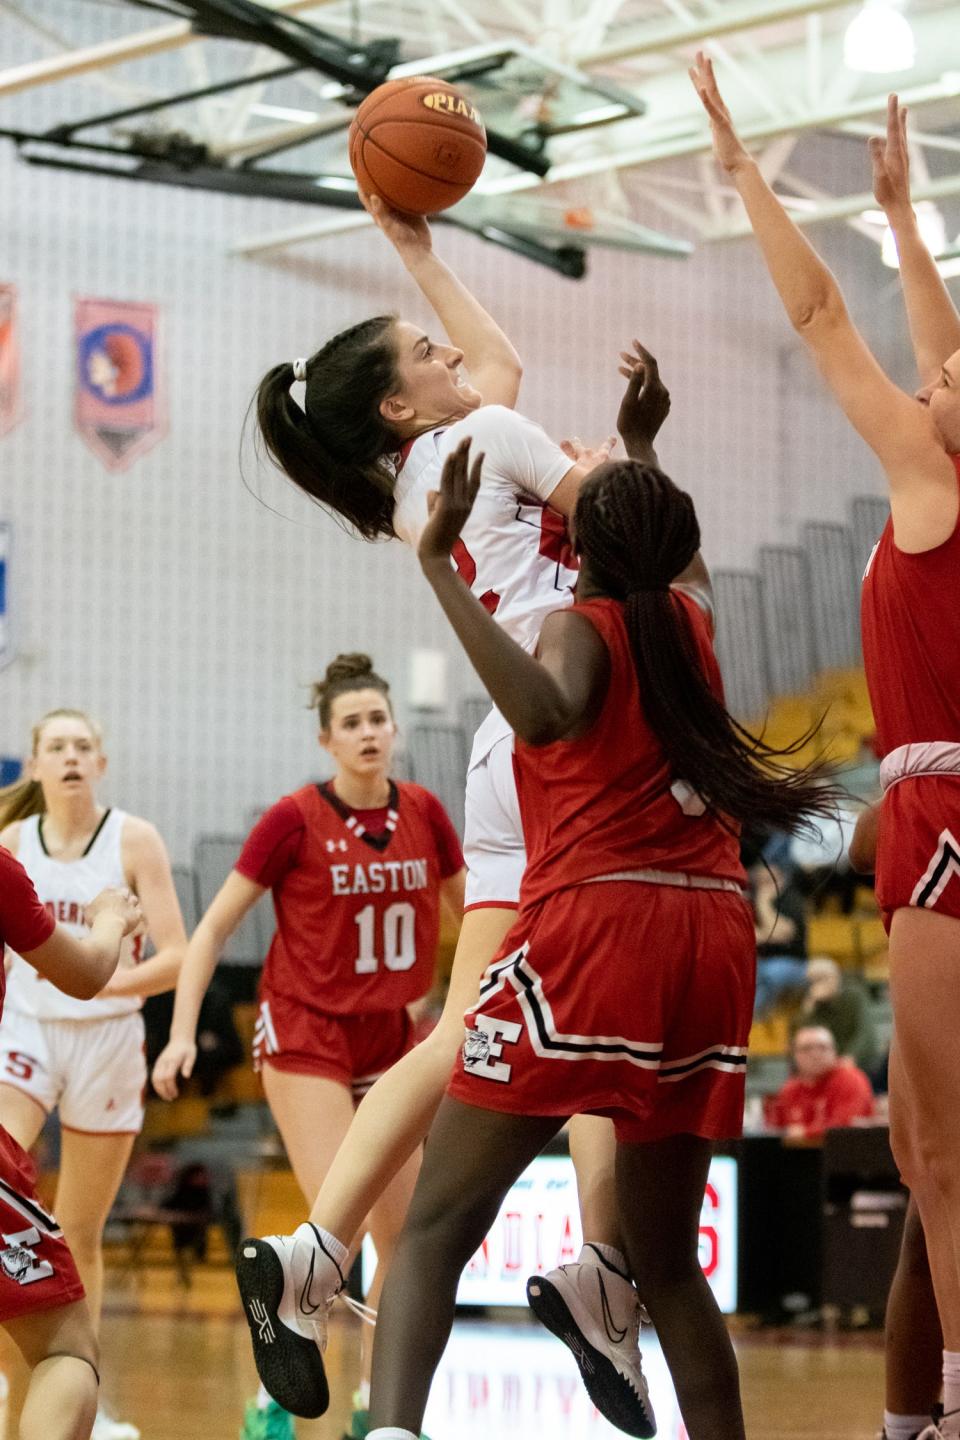 Souderton's Casey Harter shoots while covered by Easton's Sara Tamoun in a PIAA 6A first round state playoff game, on Tuesday, March 8, 2022, at Souderton High School. The Red Rovers defeated Big Red 42-36 to advance to the second round.